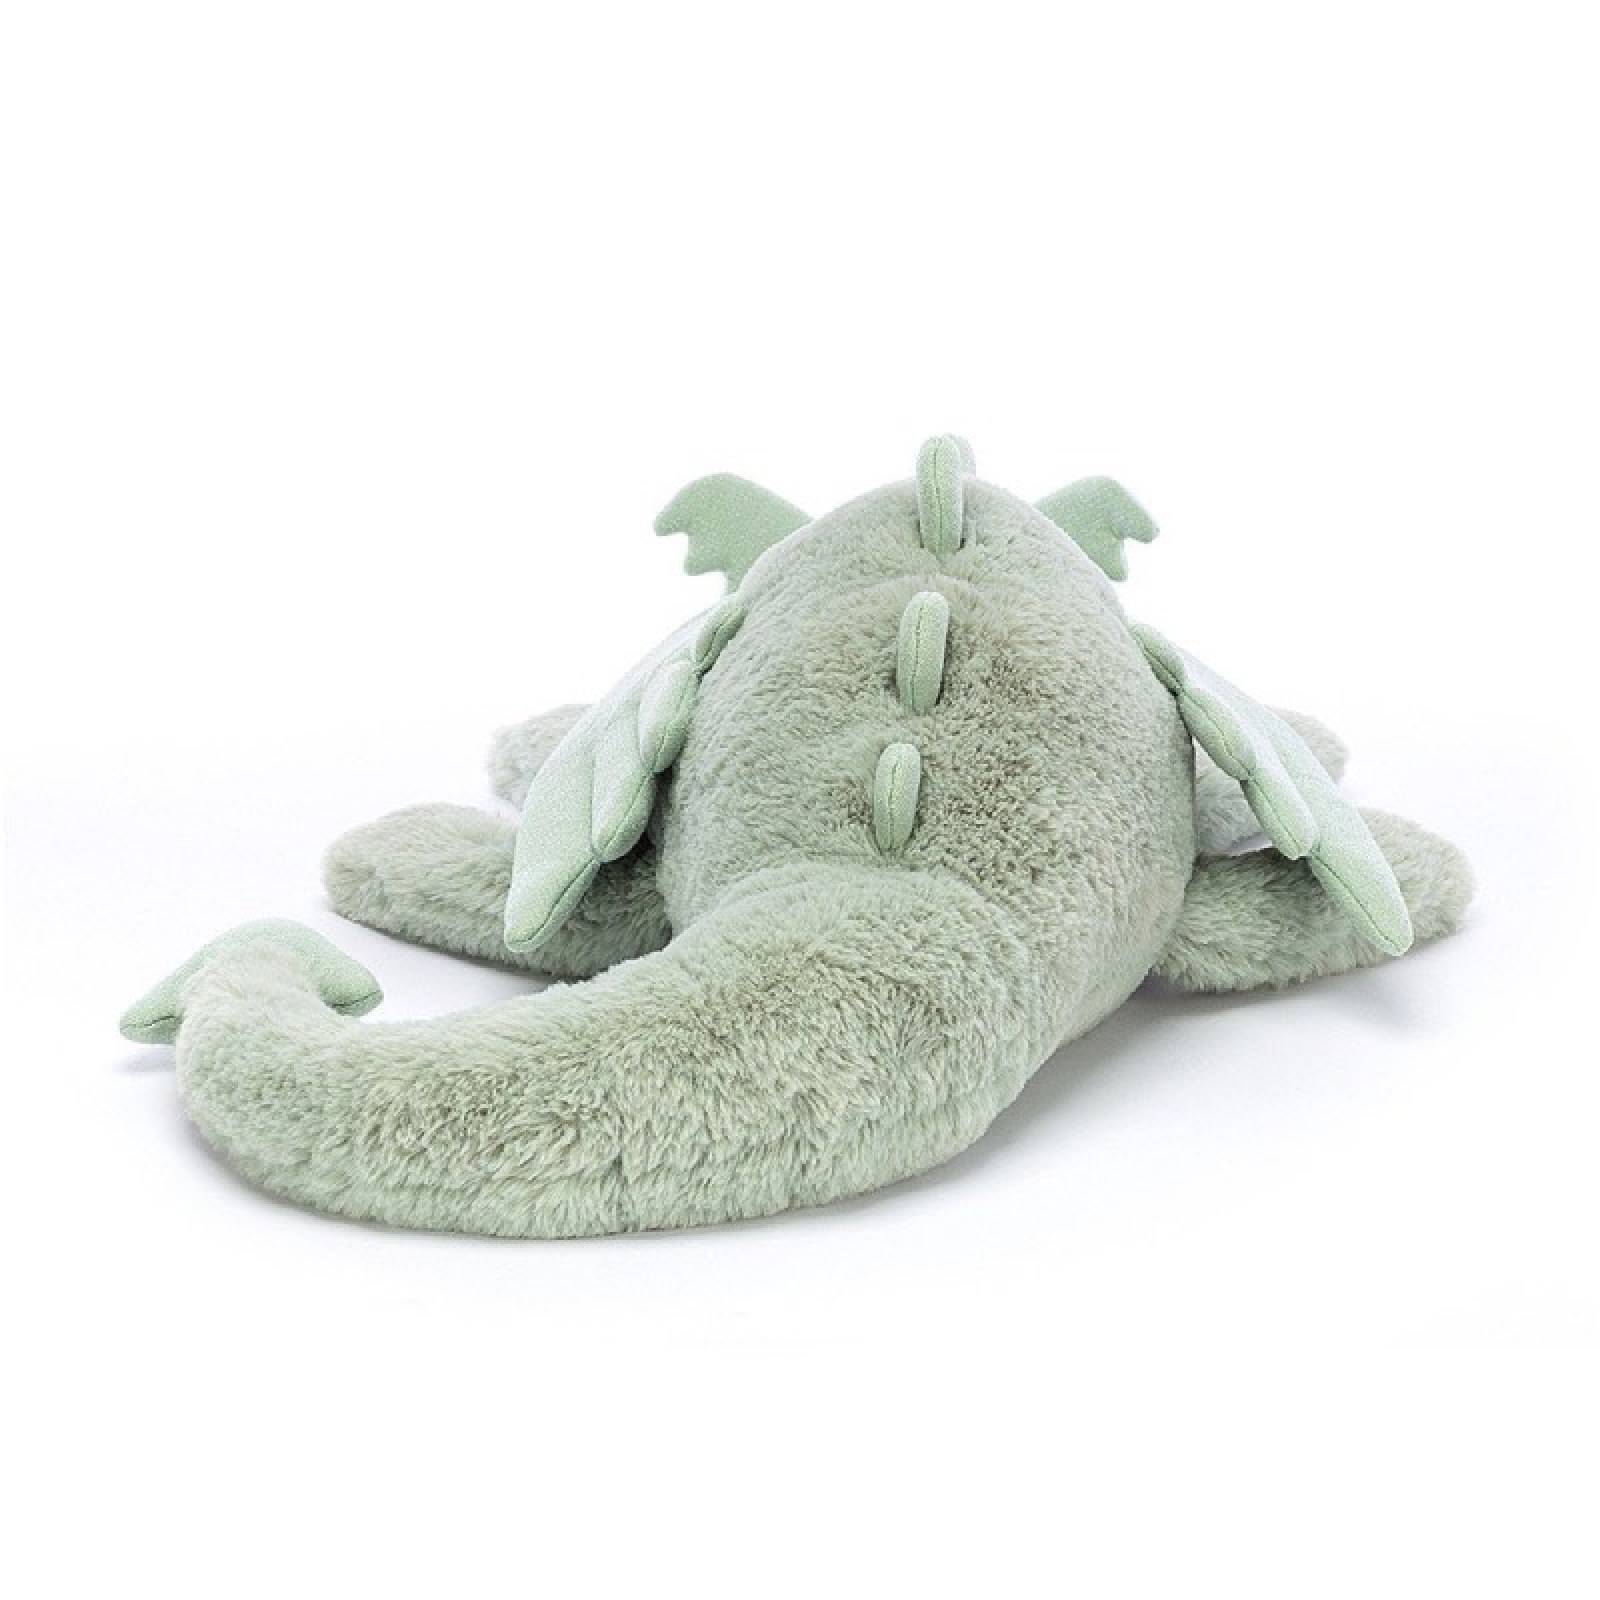 Huge Sage Dragon Soft Toy By Jellycat thumbnails